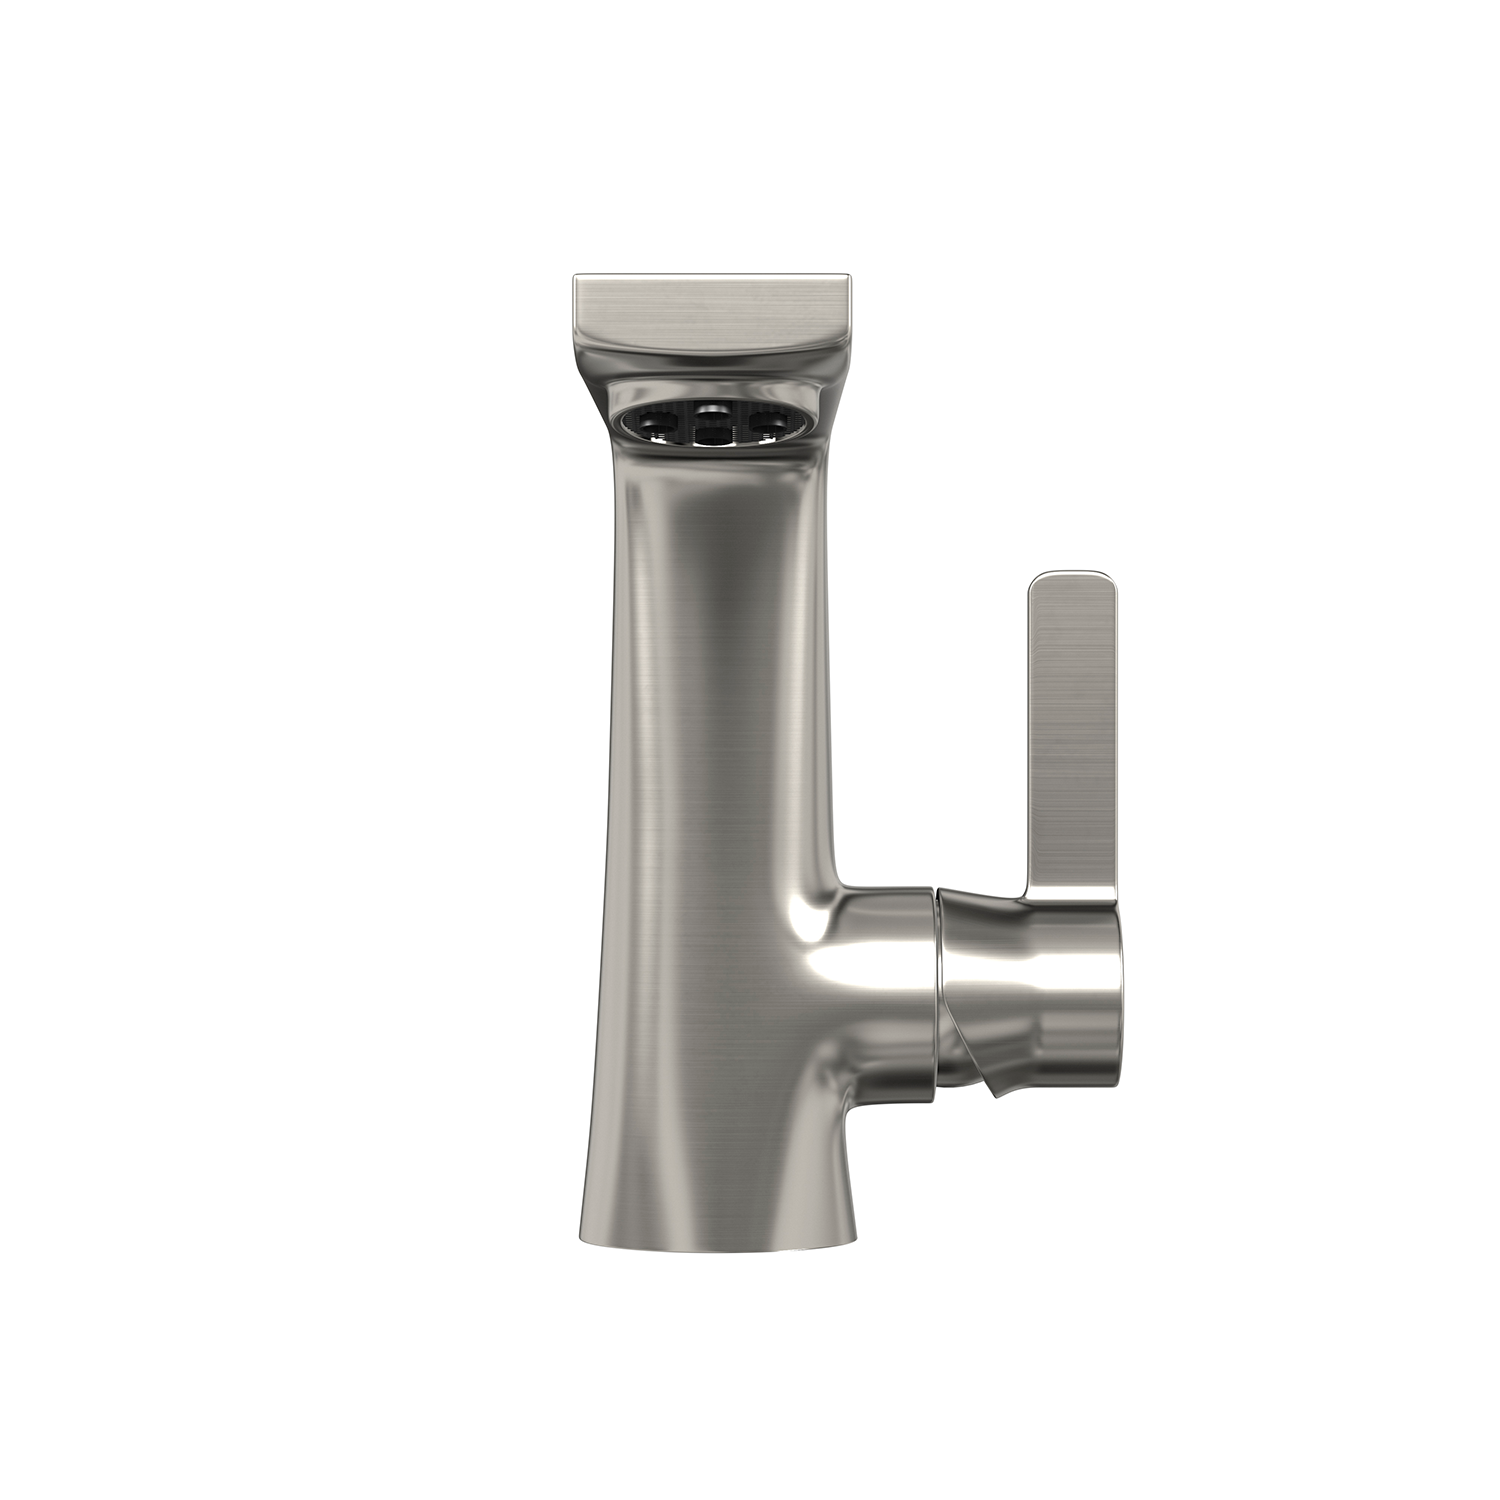 DAX Single Handle Bathroom Faucet, Brass Body, Chrome Finish, Spout Height 4-15/16 Inches (DAX-8226)